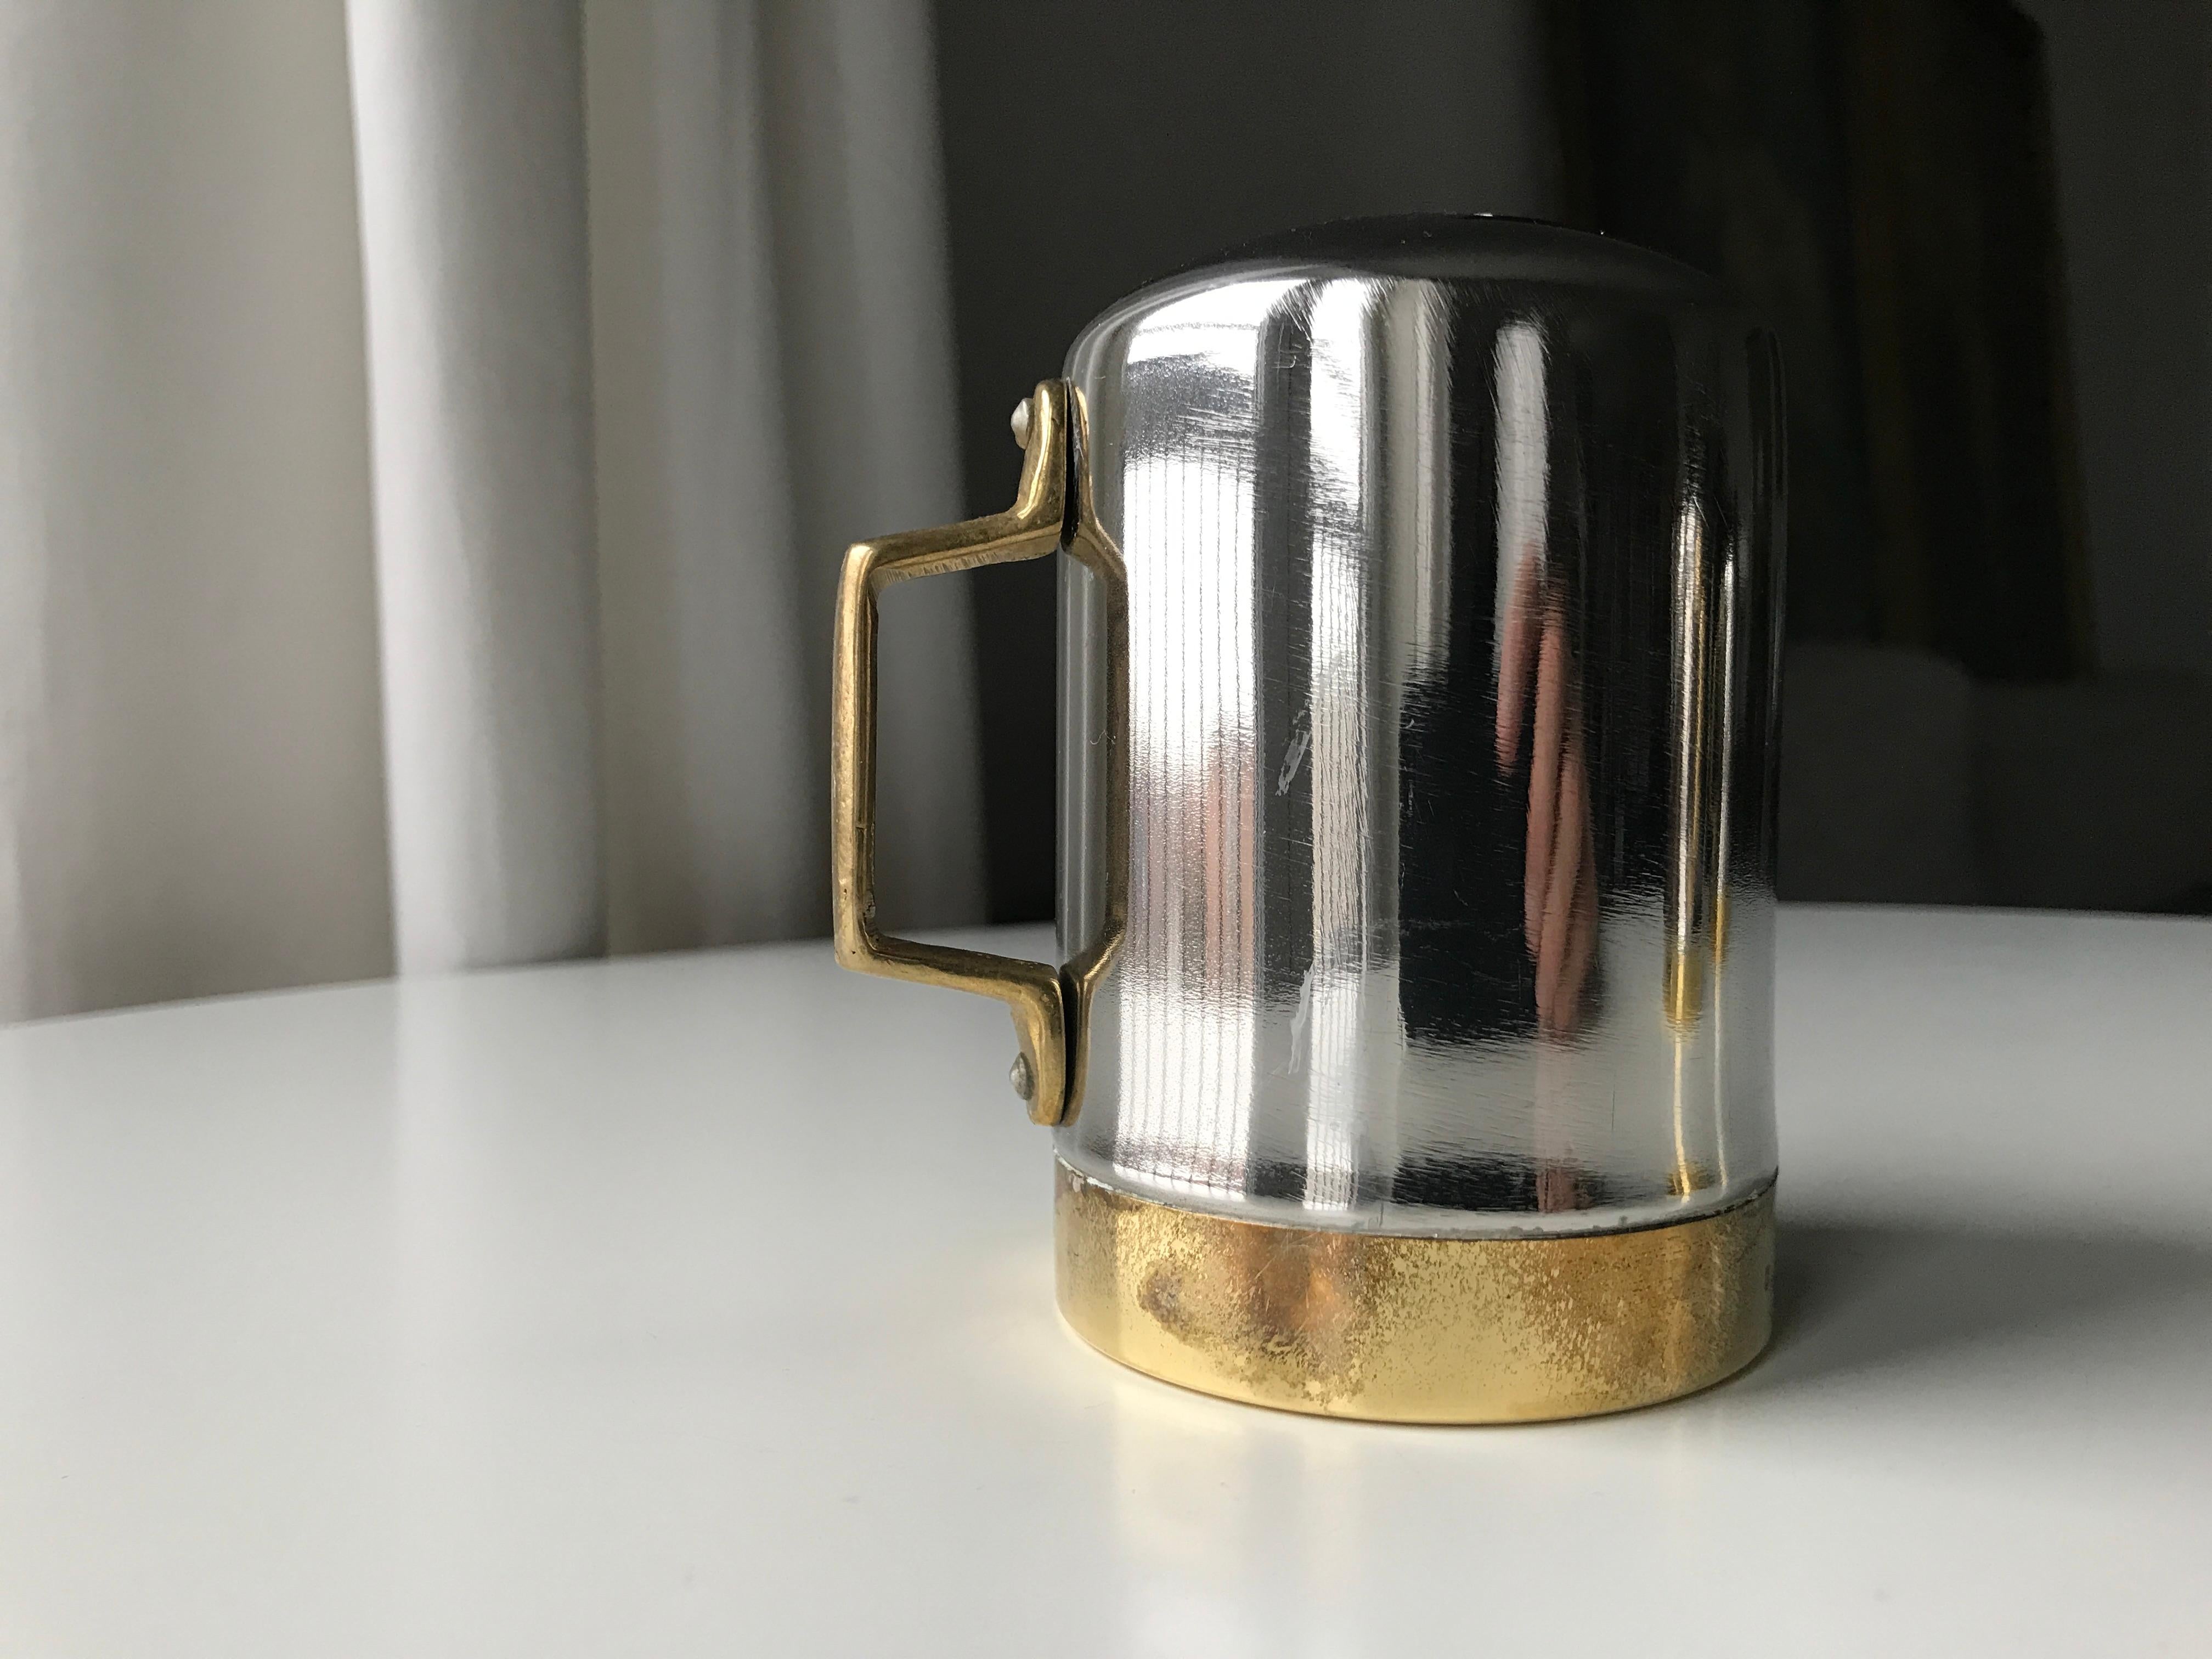 Salt and Pepper Space Age Vintage Diner Set, 1960s Chrome and Brass For Sale 12